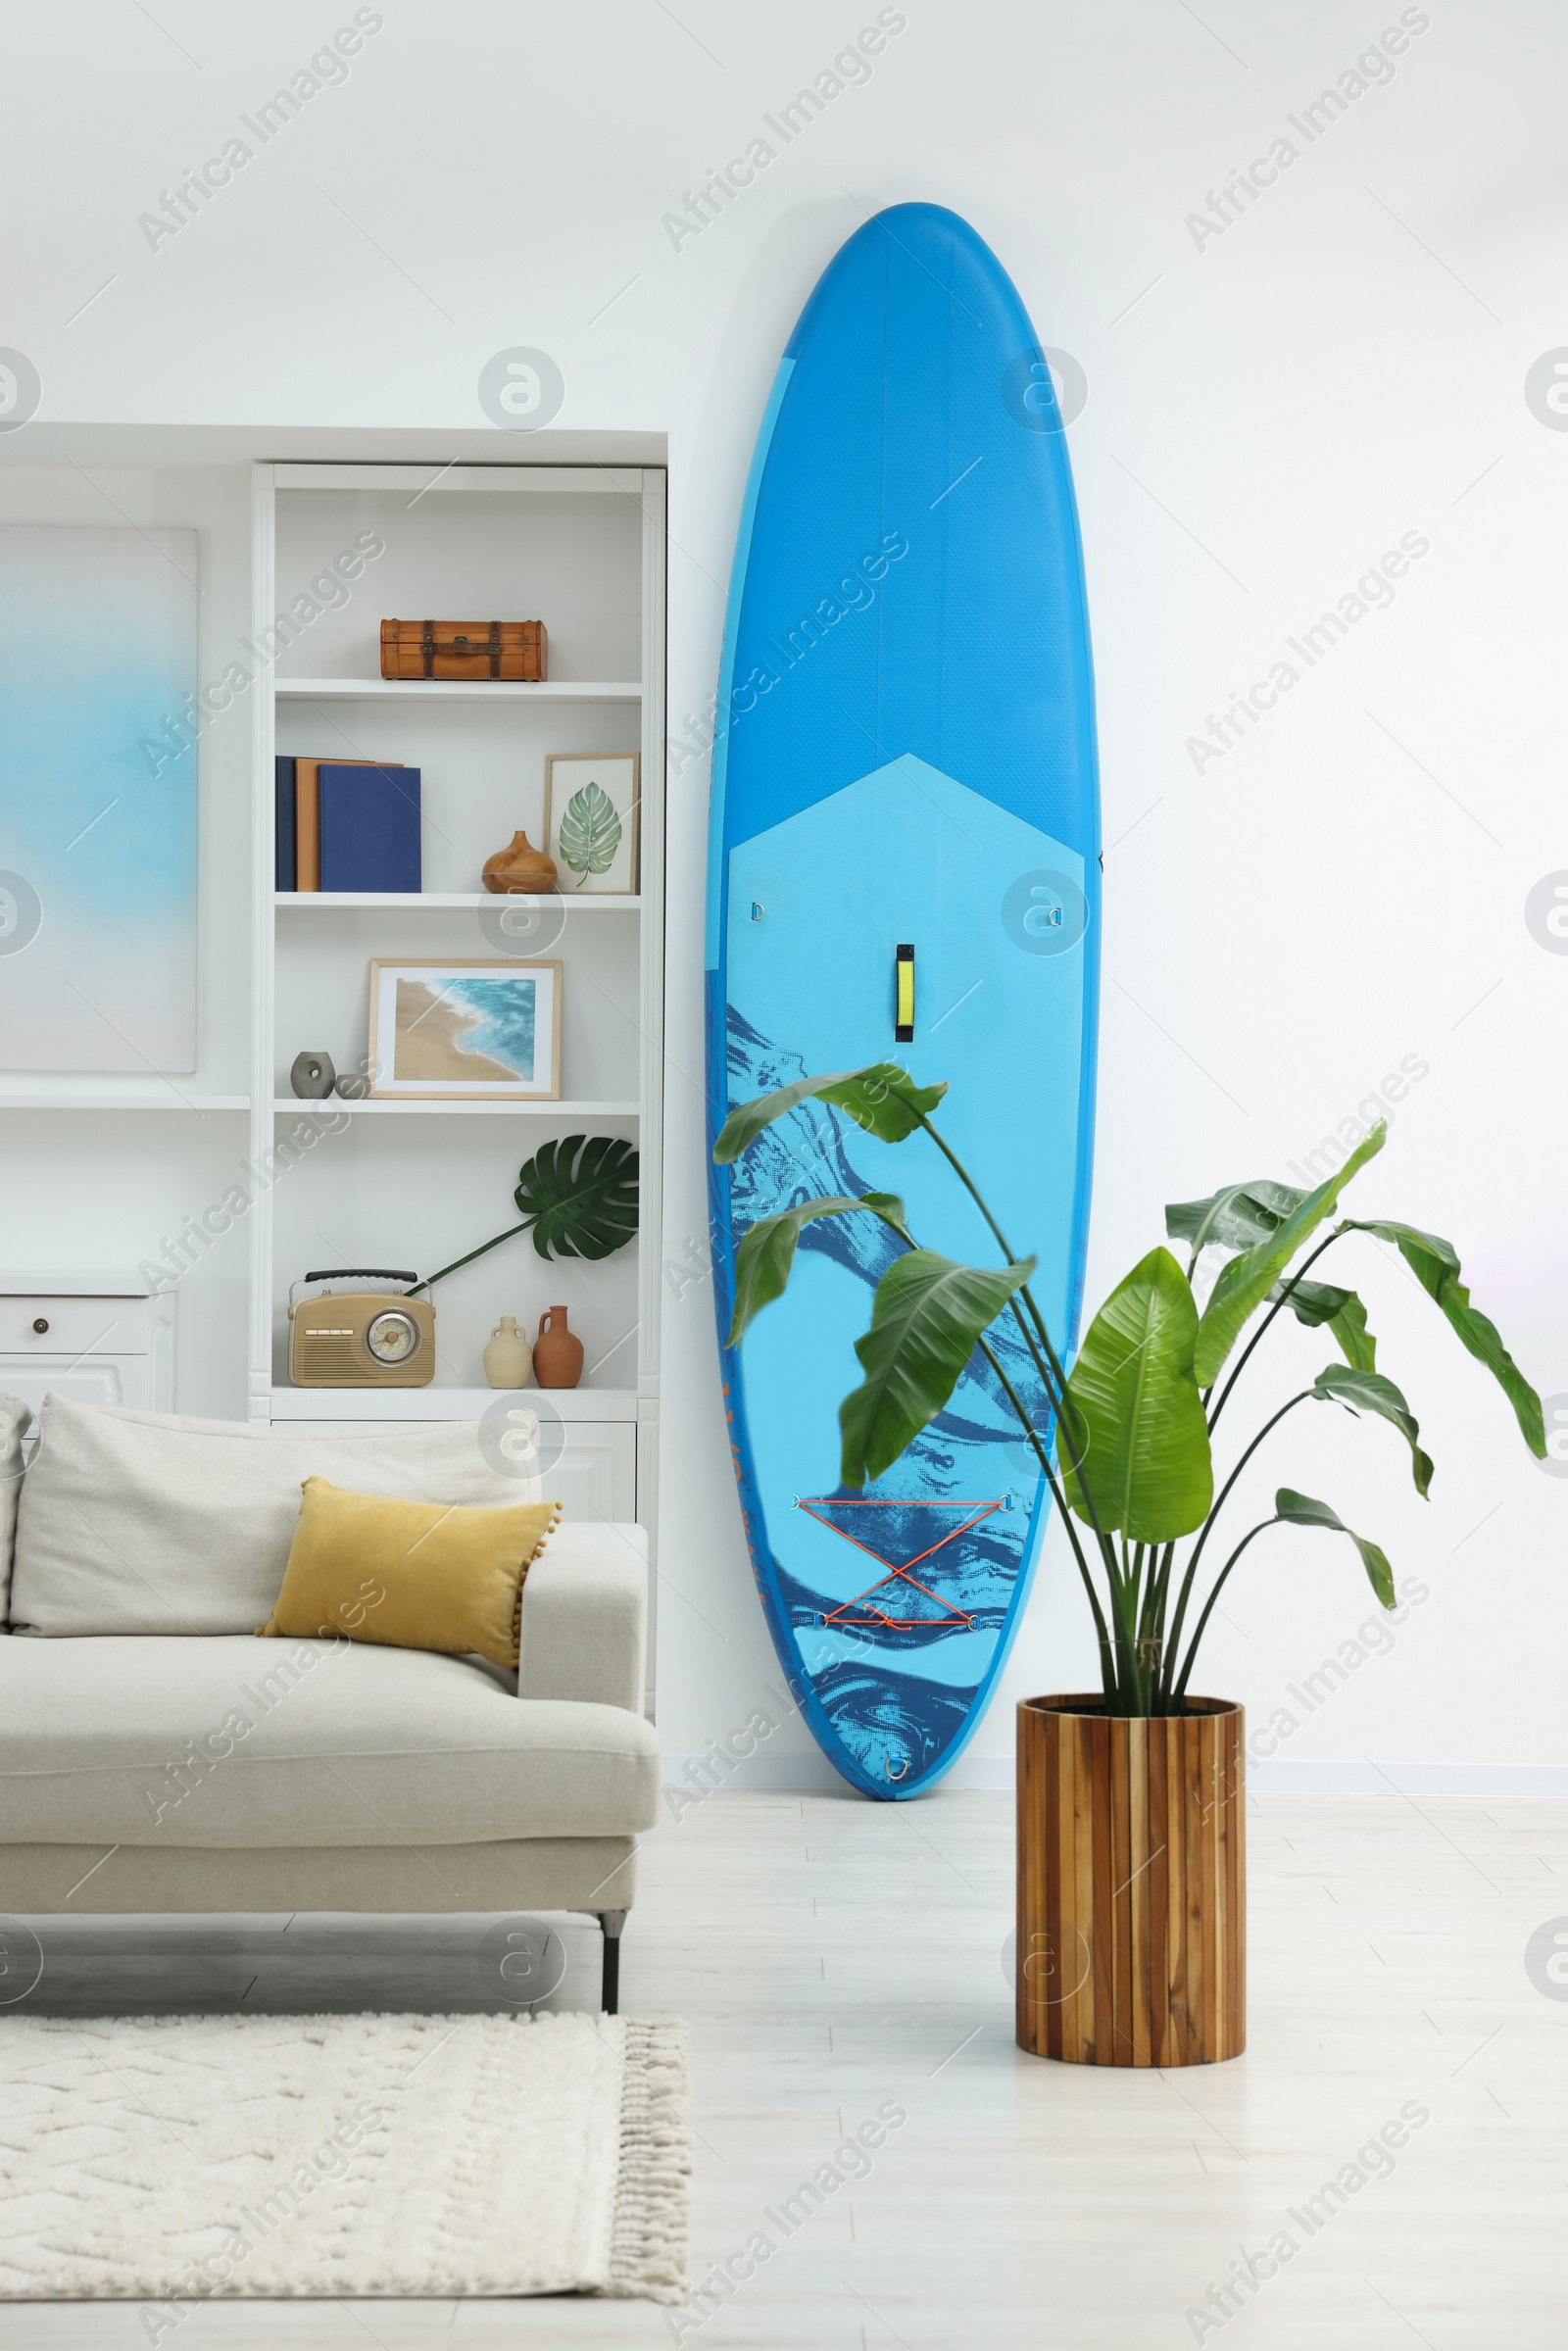 Photo of SUP board, shelving unit with different decor elements and green houseplant in room. Interior design